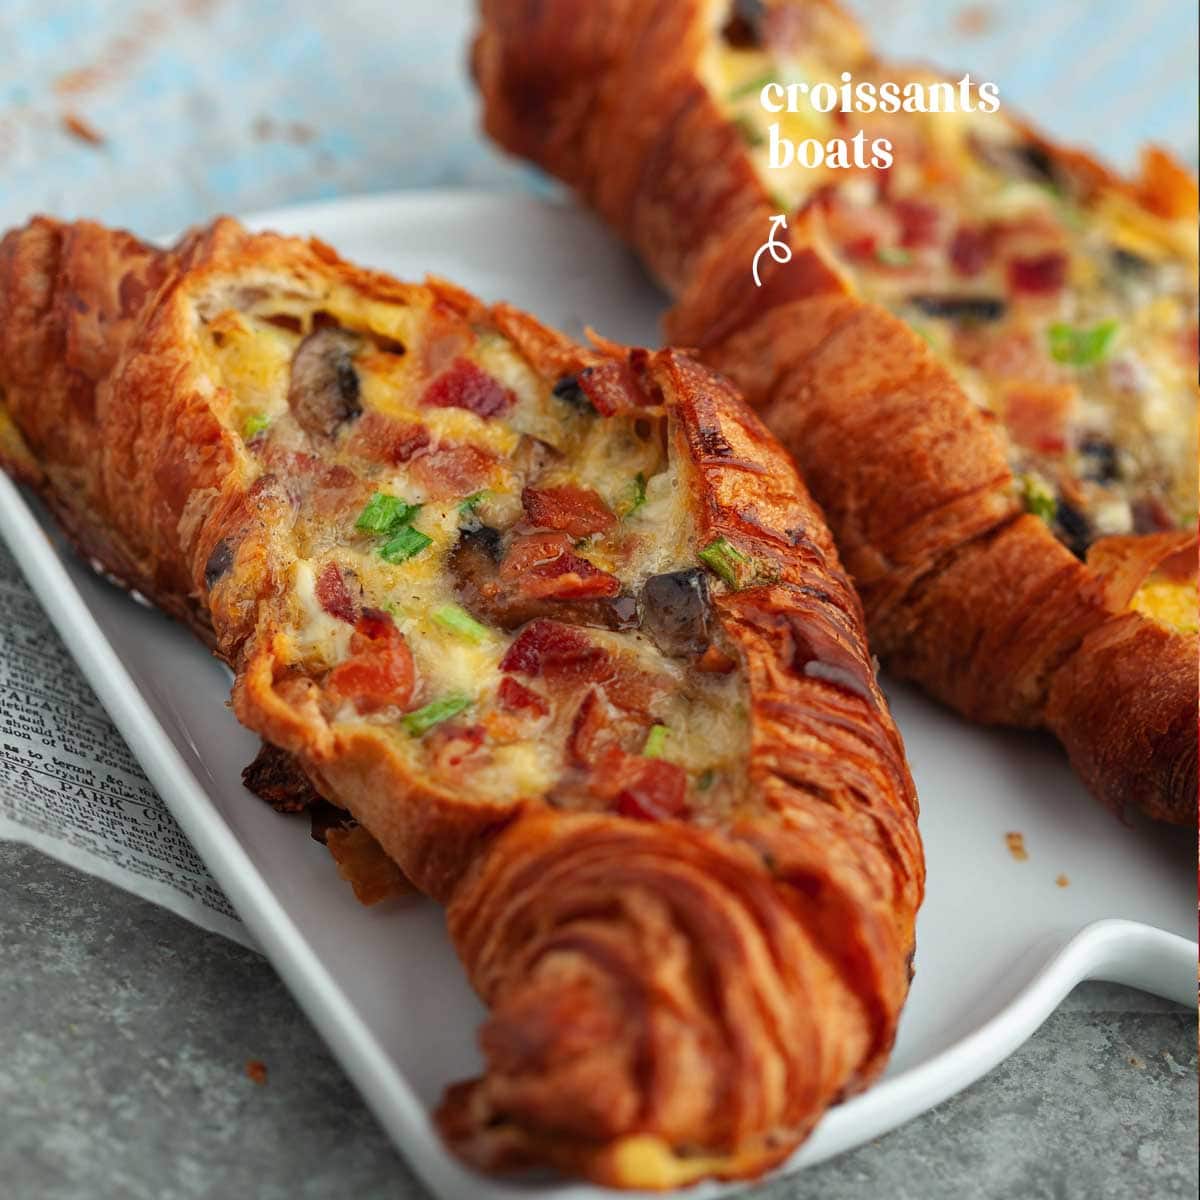 Croissant boats for breakfast are, indeed, lifesavers, especially for busy families like mine. A toast to more stress-free mornings with a croissant breakfast boat in hand!